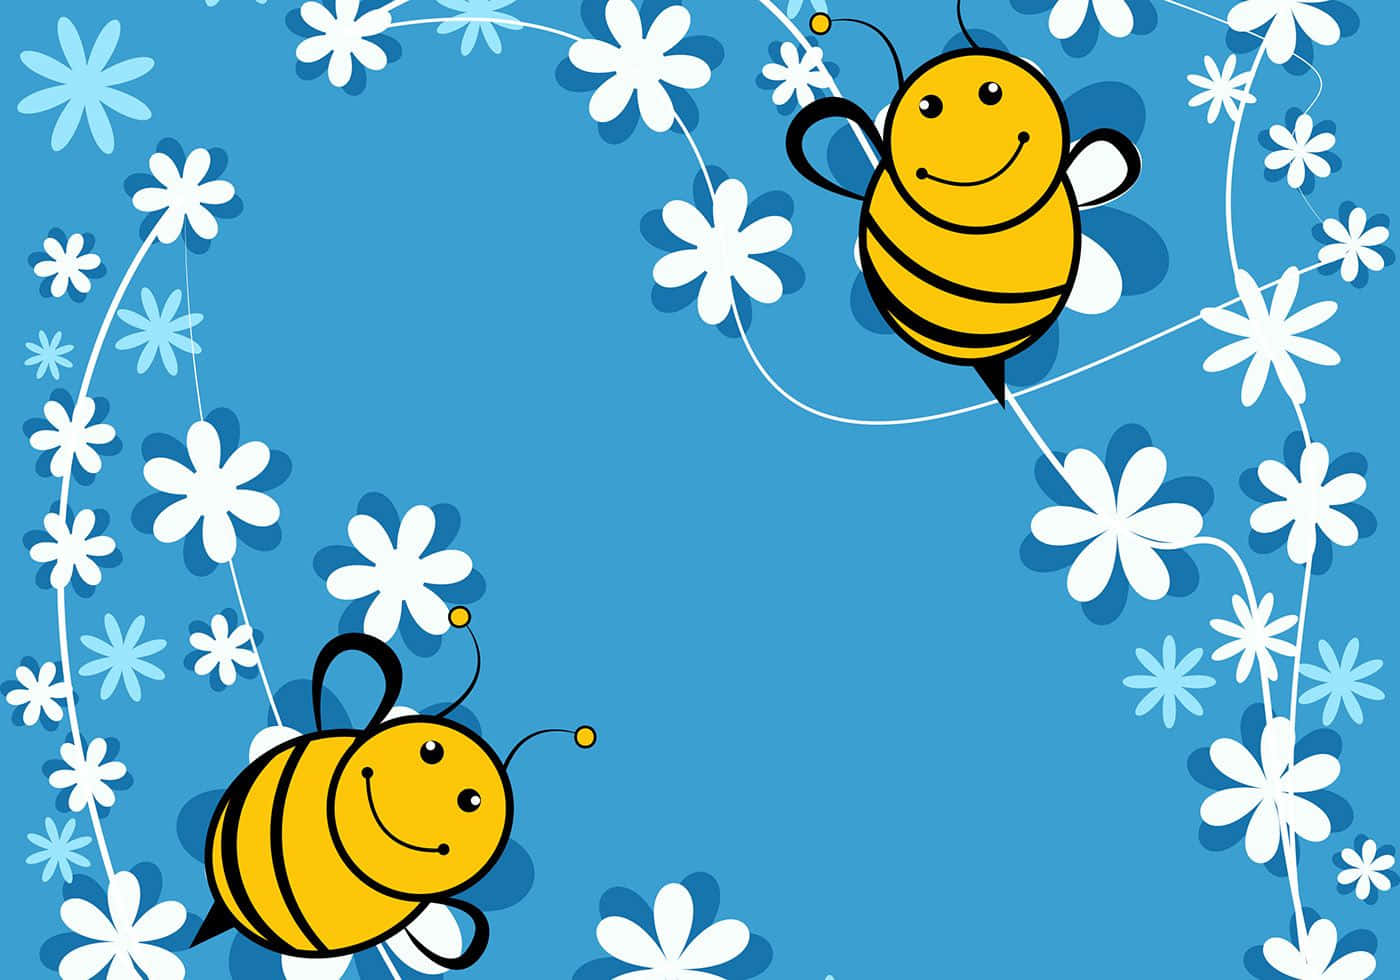 Two Smiling Cute Bees Picture